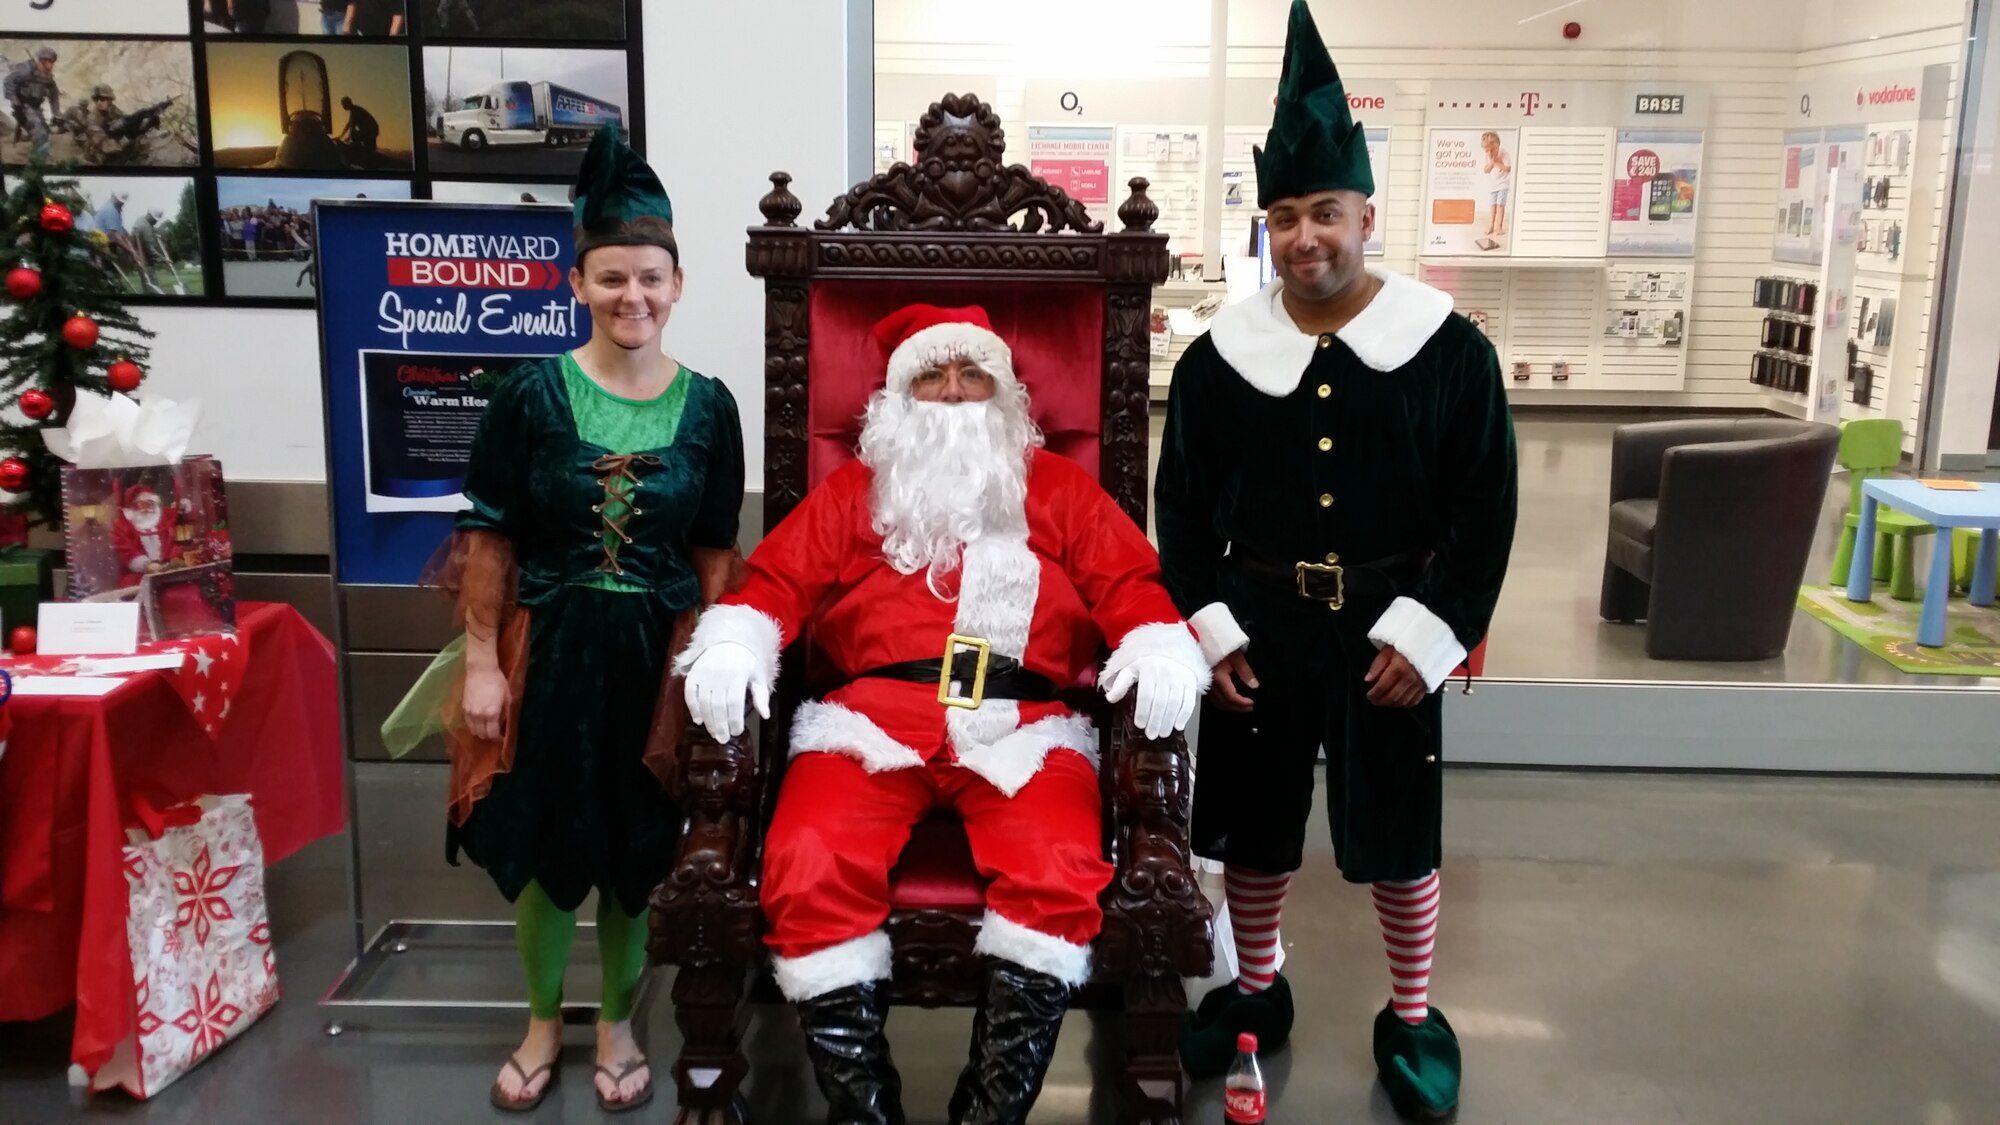 U.S. Air Force Master Sgt. Jennifer Miranda, left, U.S. Air Force Master Sgt. Mark Cutler, center, and U.S. Air Force Master Sgt. Jason Garo, right, all from the Spangdahlem First Sergeant Council, dressed as elves and Santa during an Operation Warm Heart “Christmas in July” Random Act of Kindness event July 27, 2014, in the Exchange at Spangdahlem Air Base, Germany. (U.S. Air Force courtesy photo/Released)